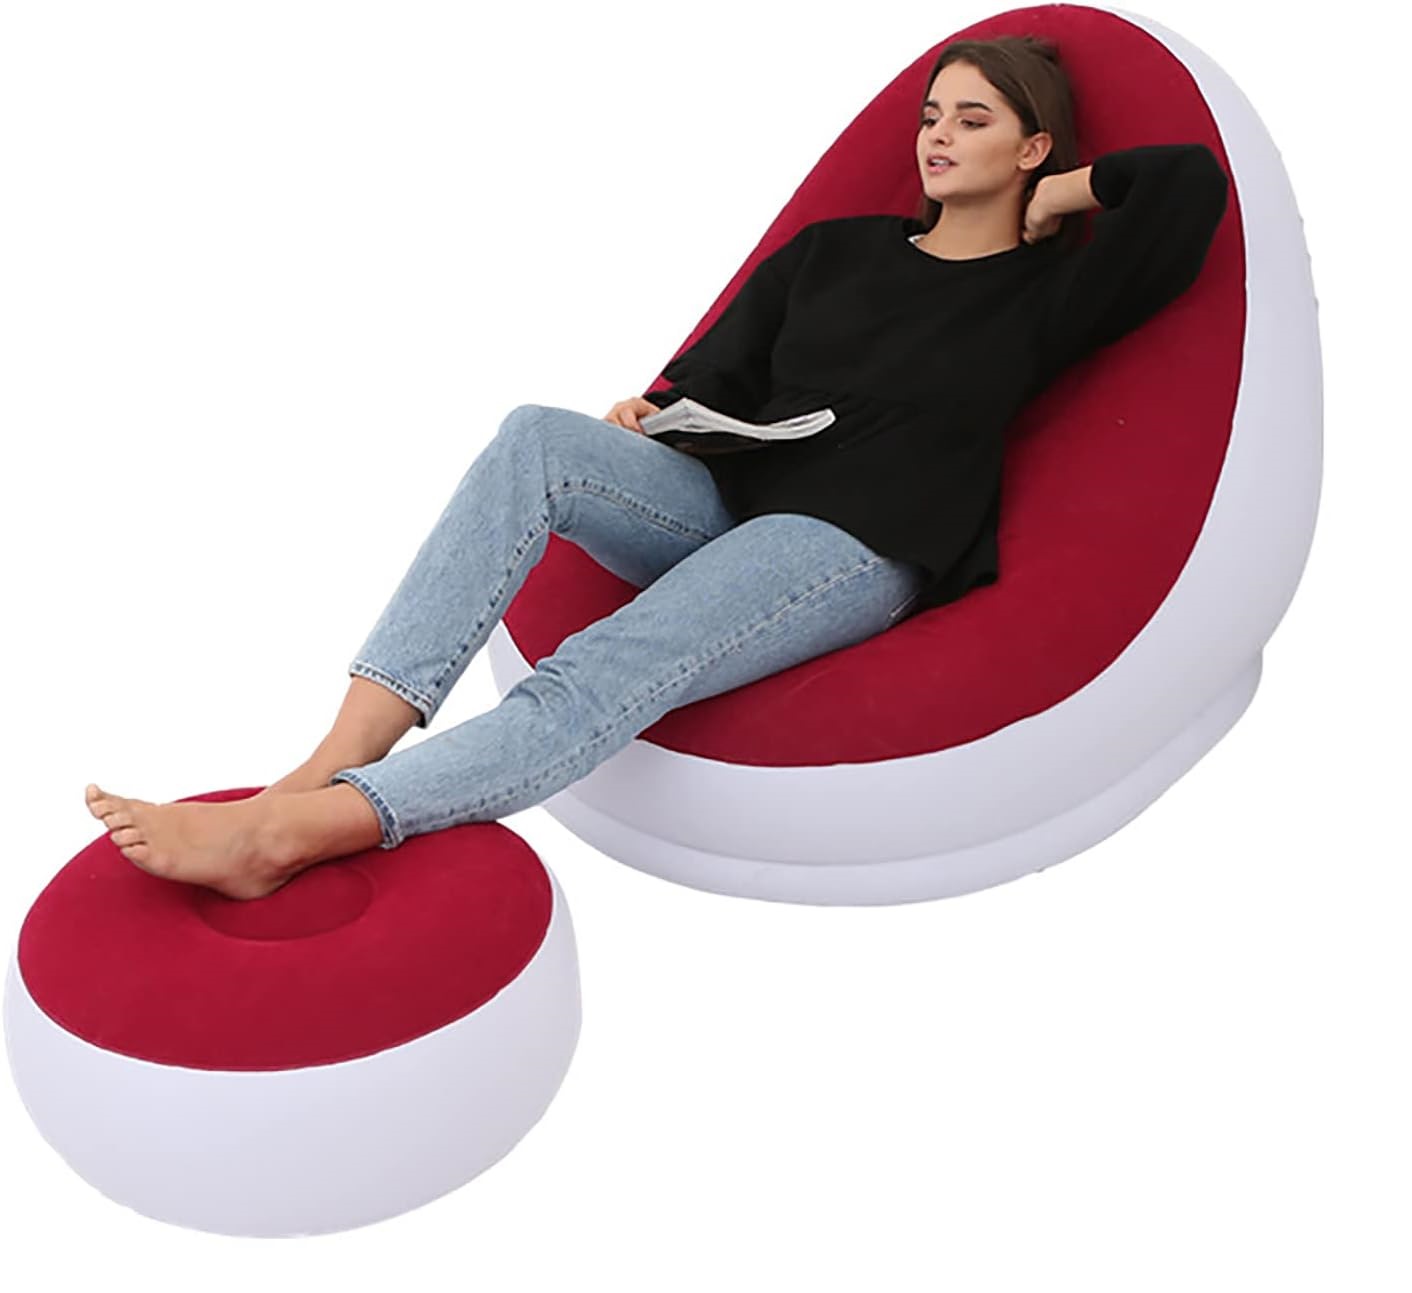 Inflatable lounge chair for indoor living